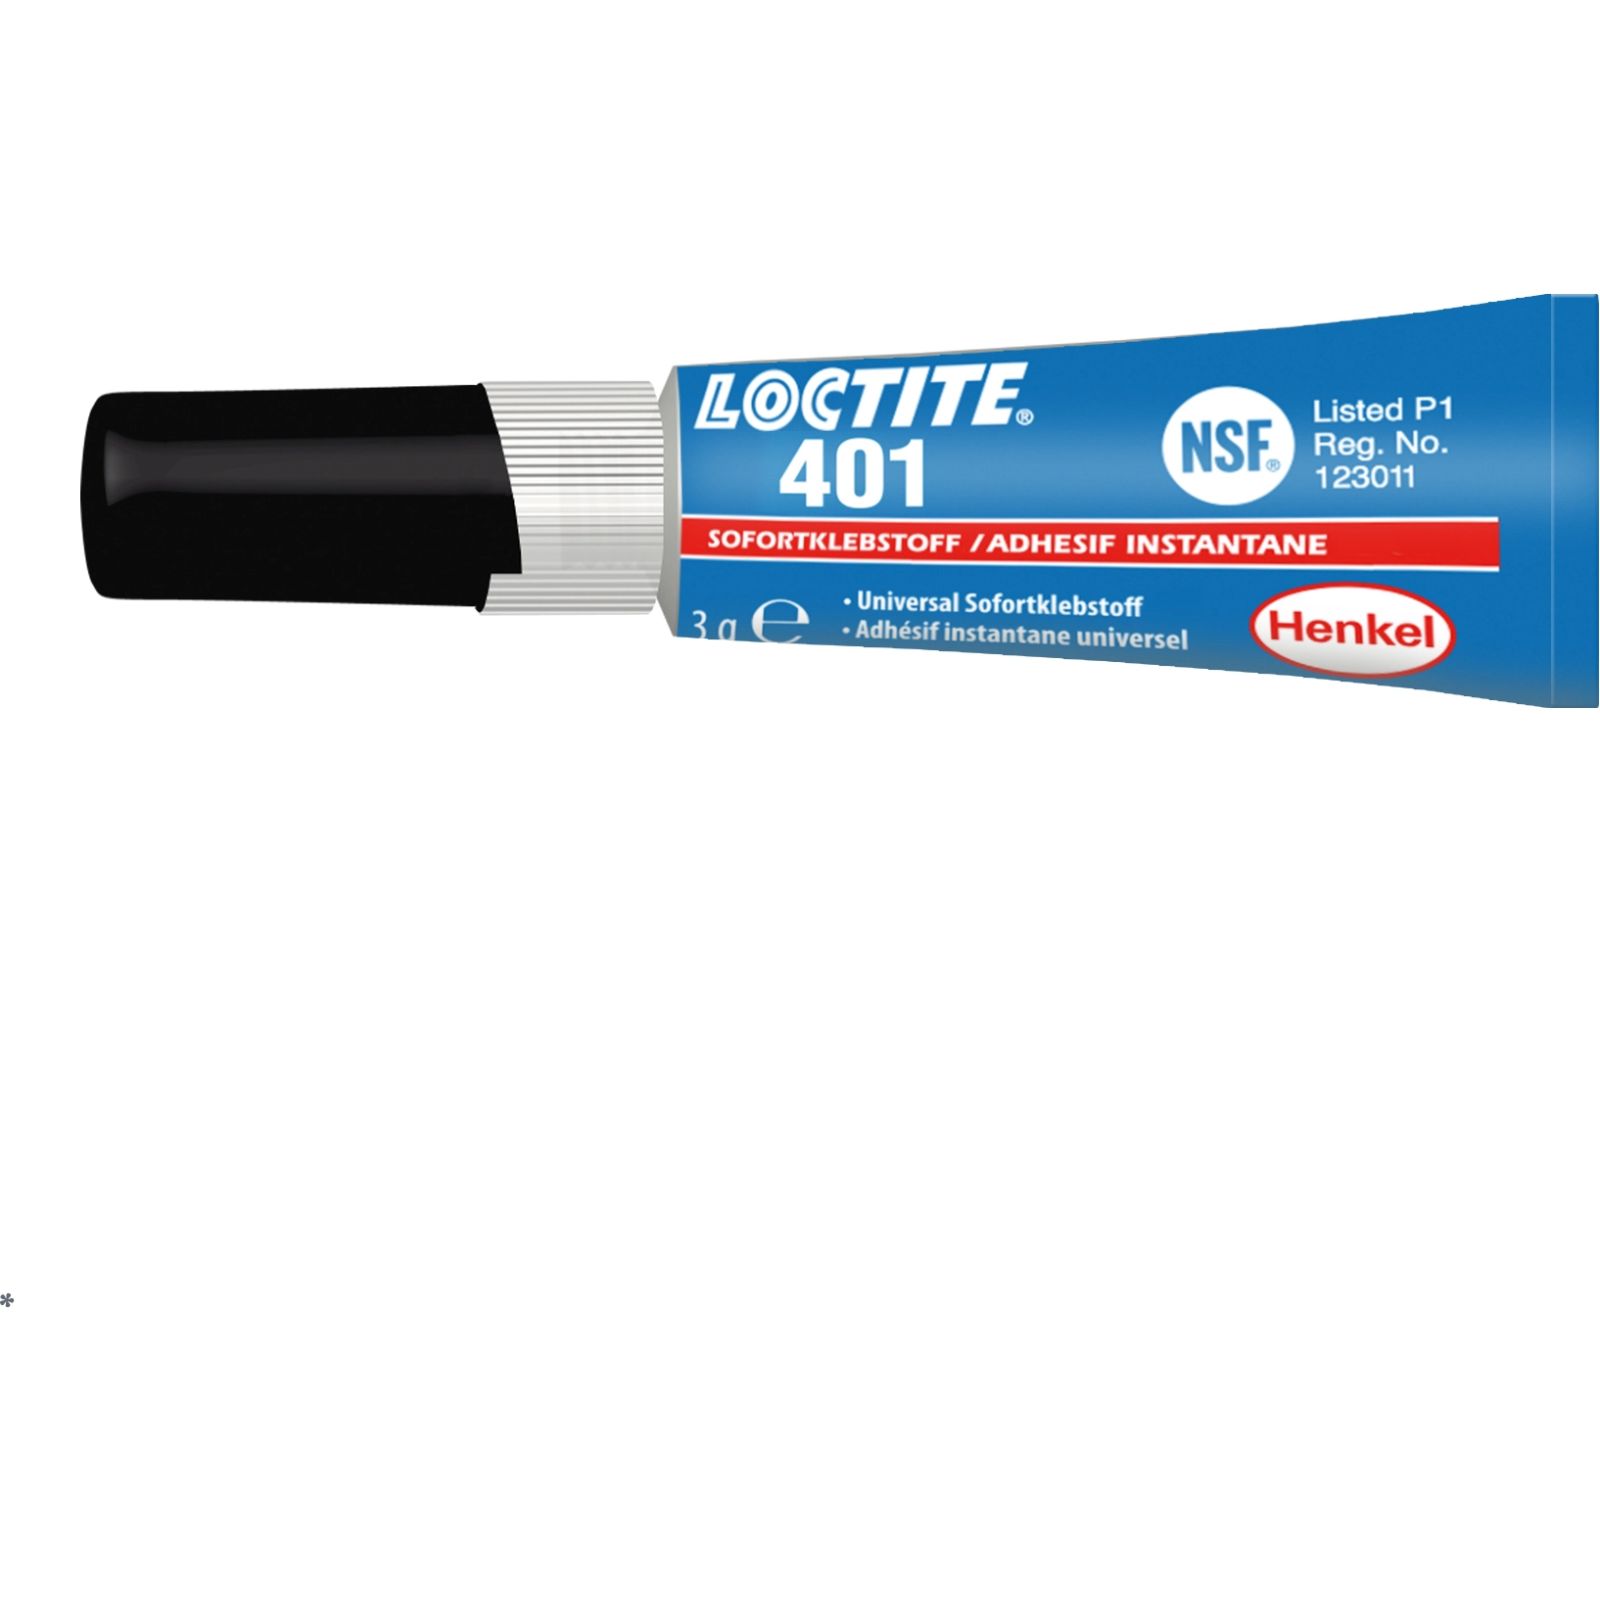 https://www.autoteile-store.at/img/product/loctite-401-3g-blister-sofortklebestoff-universal-195904-296791/ed734f2209a214626315a1bb4daeb2df_1600.jpg